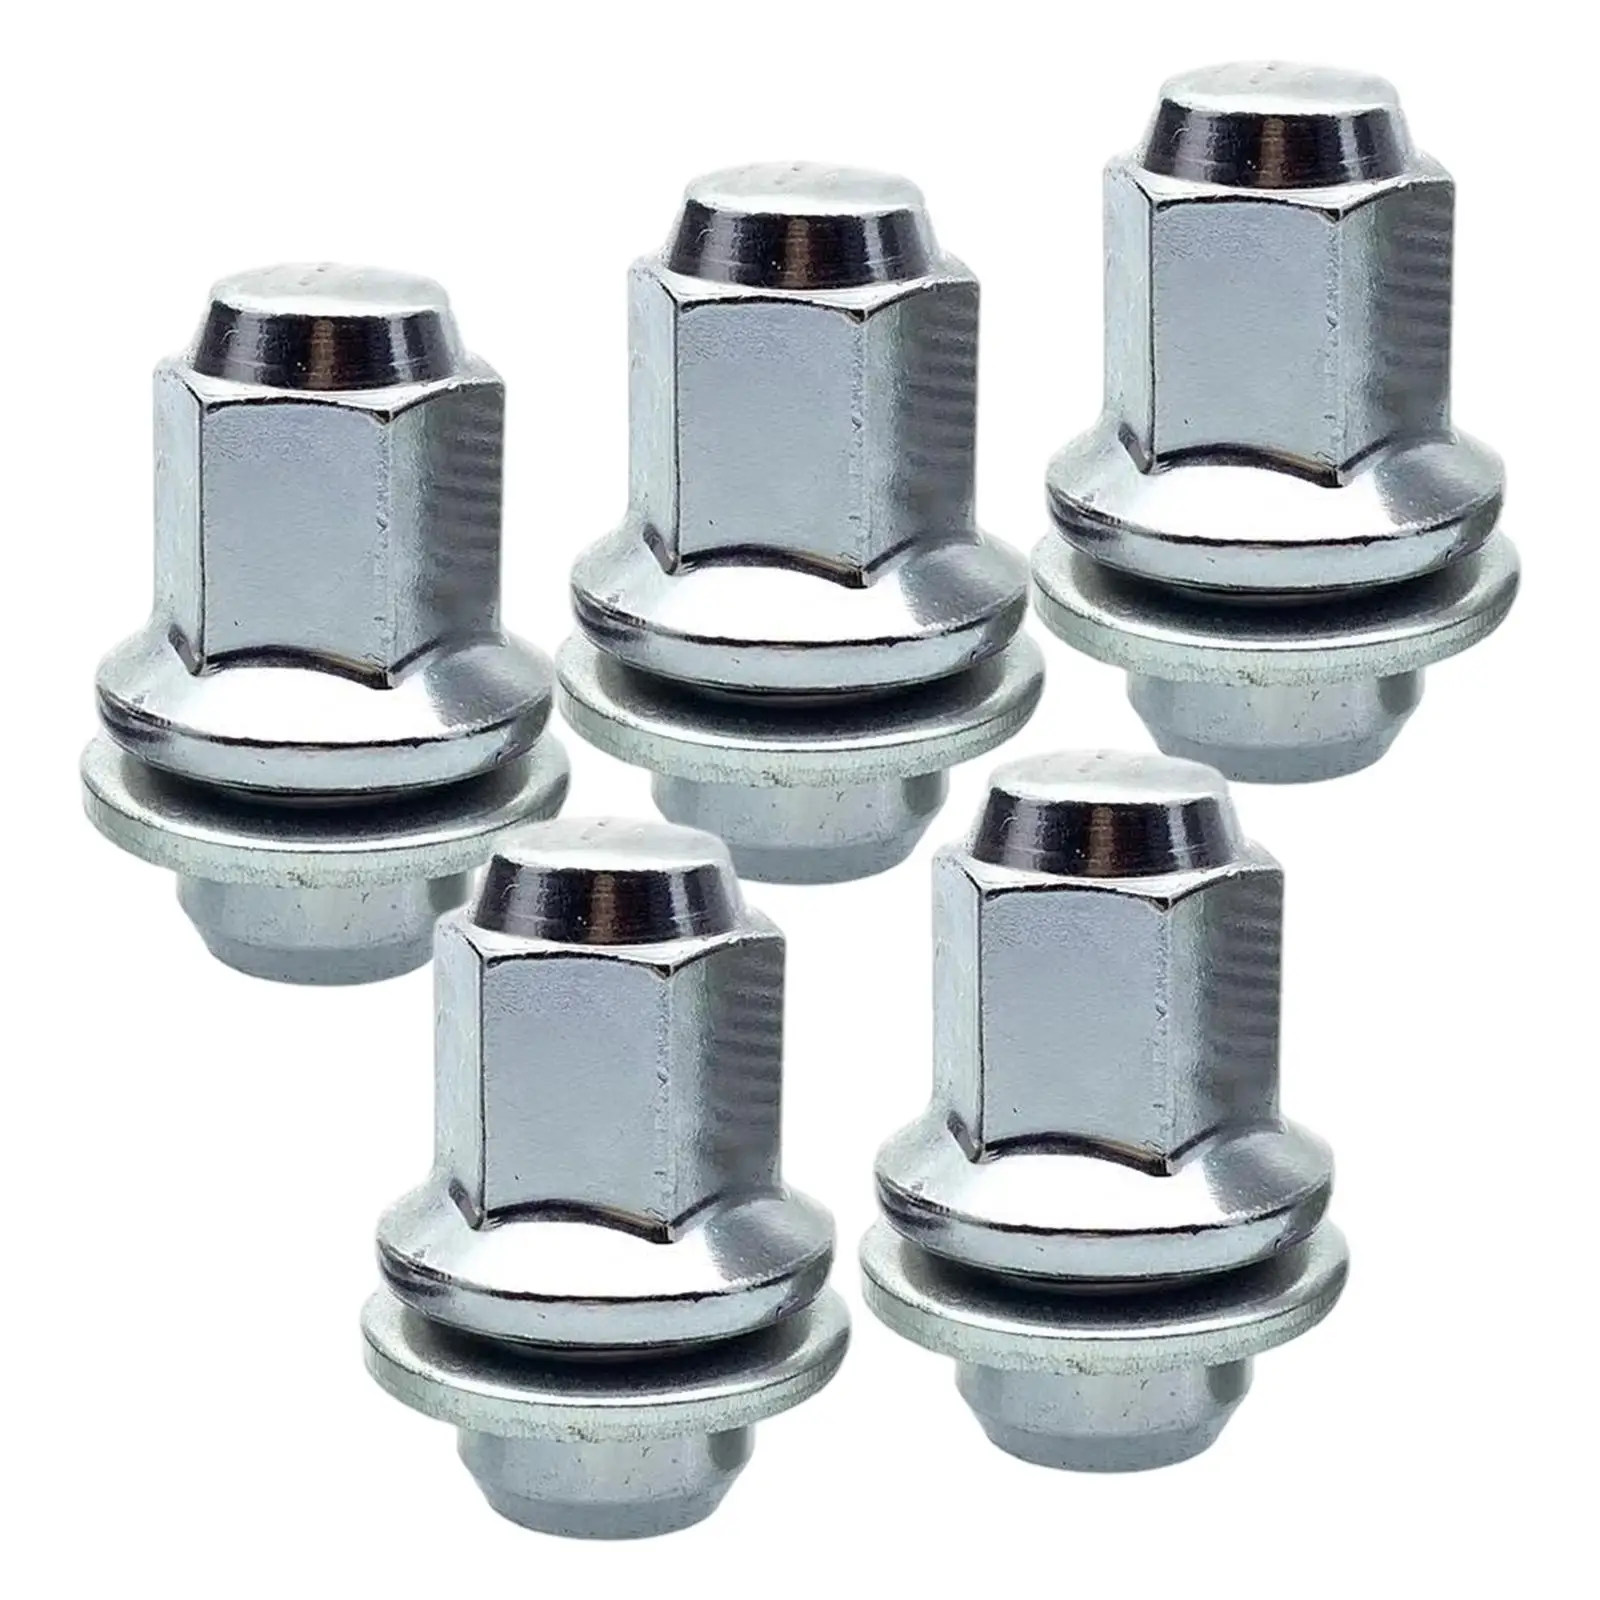 5x Wheel Lug Nut Stainless Steel Fit for Xks Accessories Parts